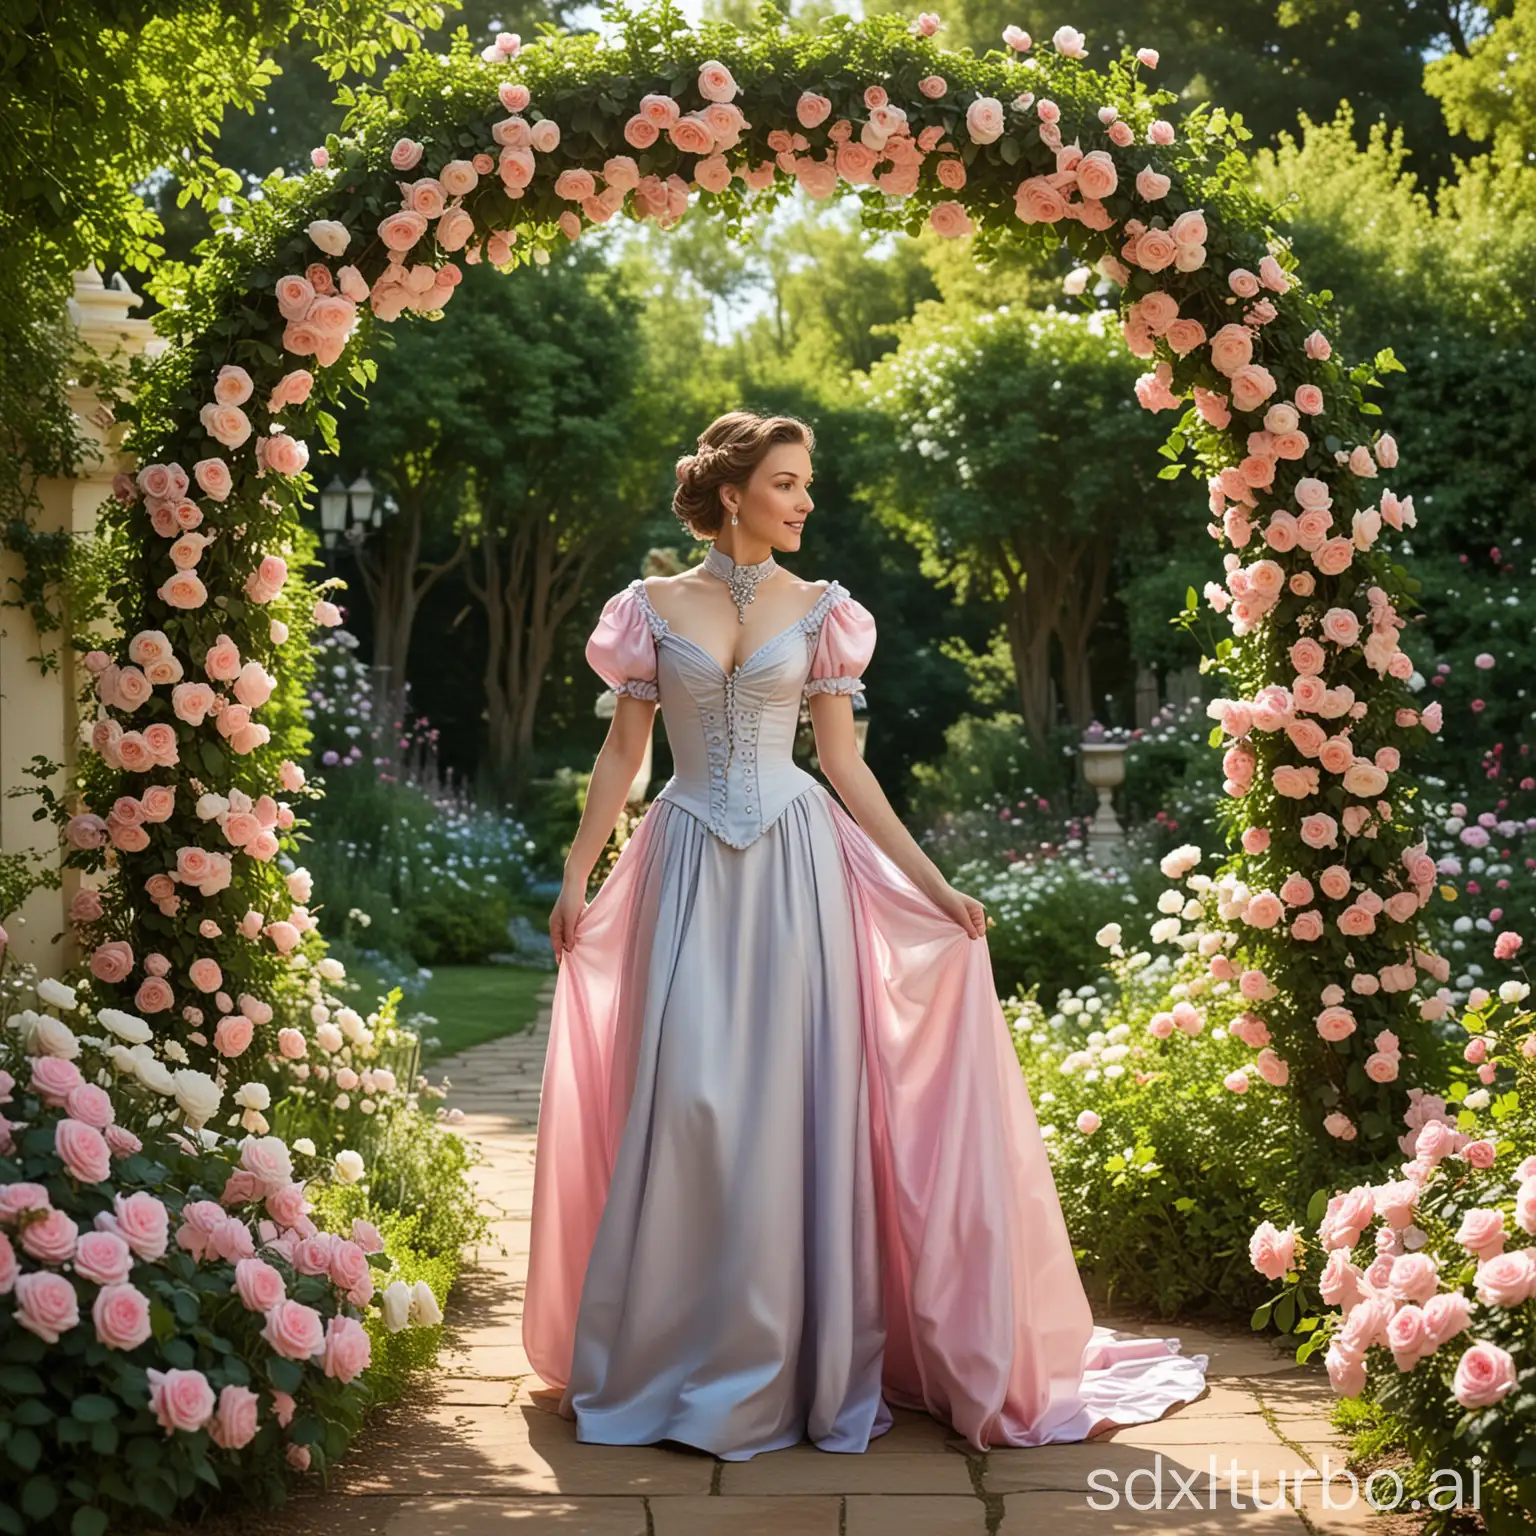 caver in the red seaThe image depicts a woman in a long, flowing dress with a high collar and corset, holding a fan in her right hand. She is standing in a garden filled with pink and white roses, with a blue archway in the background. The woman's hair is styled in an elegant updo, and she is wearing a necklace and earrings. The scene is set against a backdrop of lush green trees and a clear blue sky.